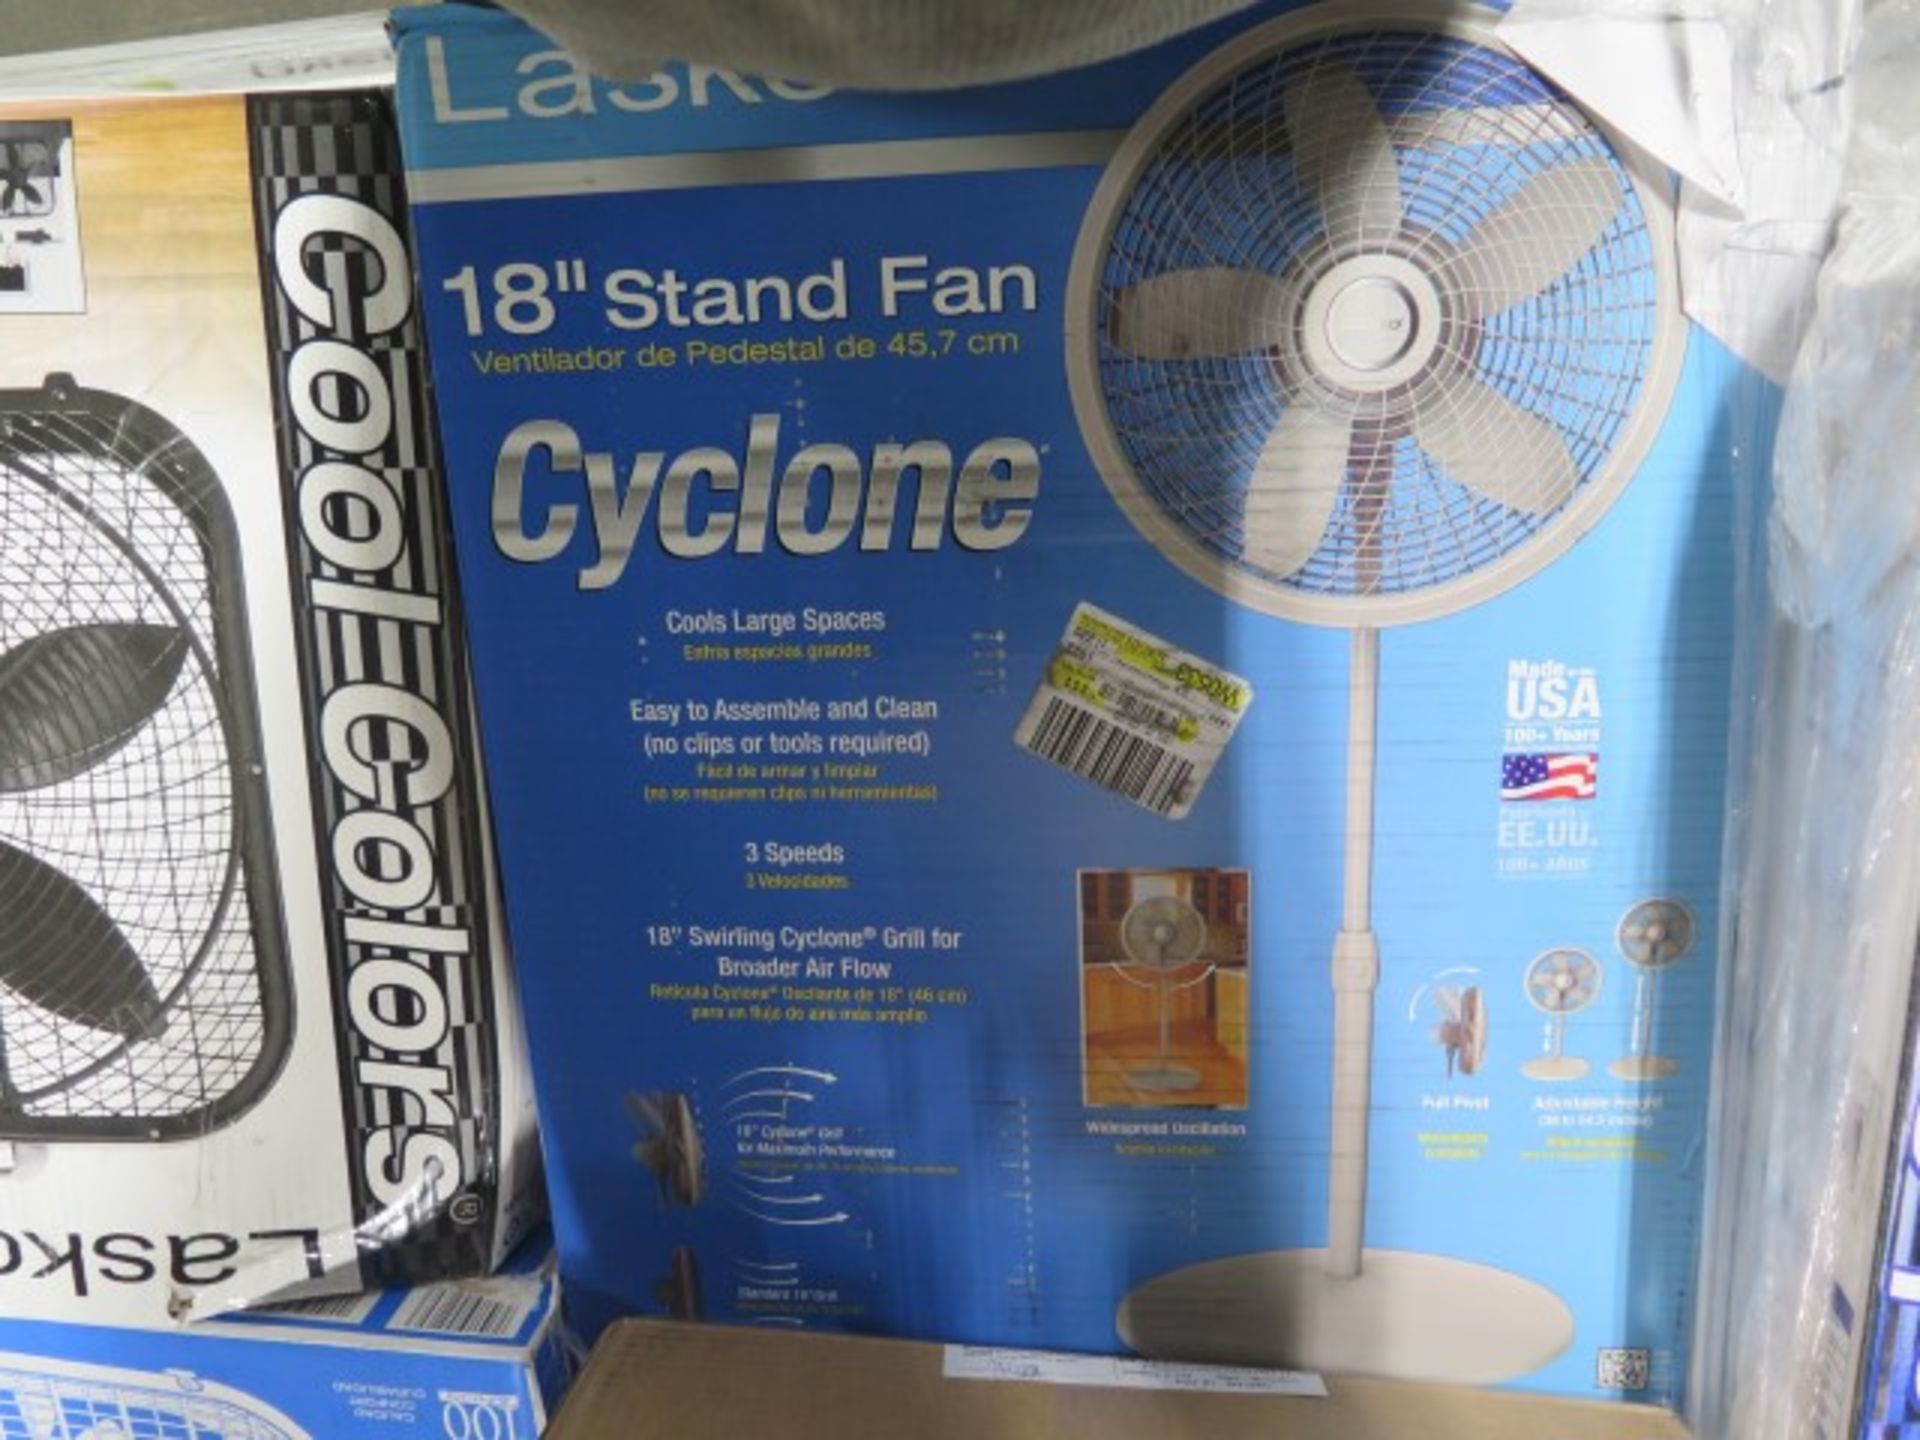 Lot of Floor Fans with $453 ESTIMATED retail value. Lot includesLasko 18" Stand Fan with Cyclone - Image 4 of 5